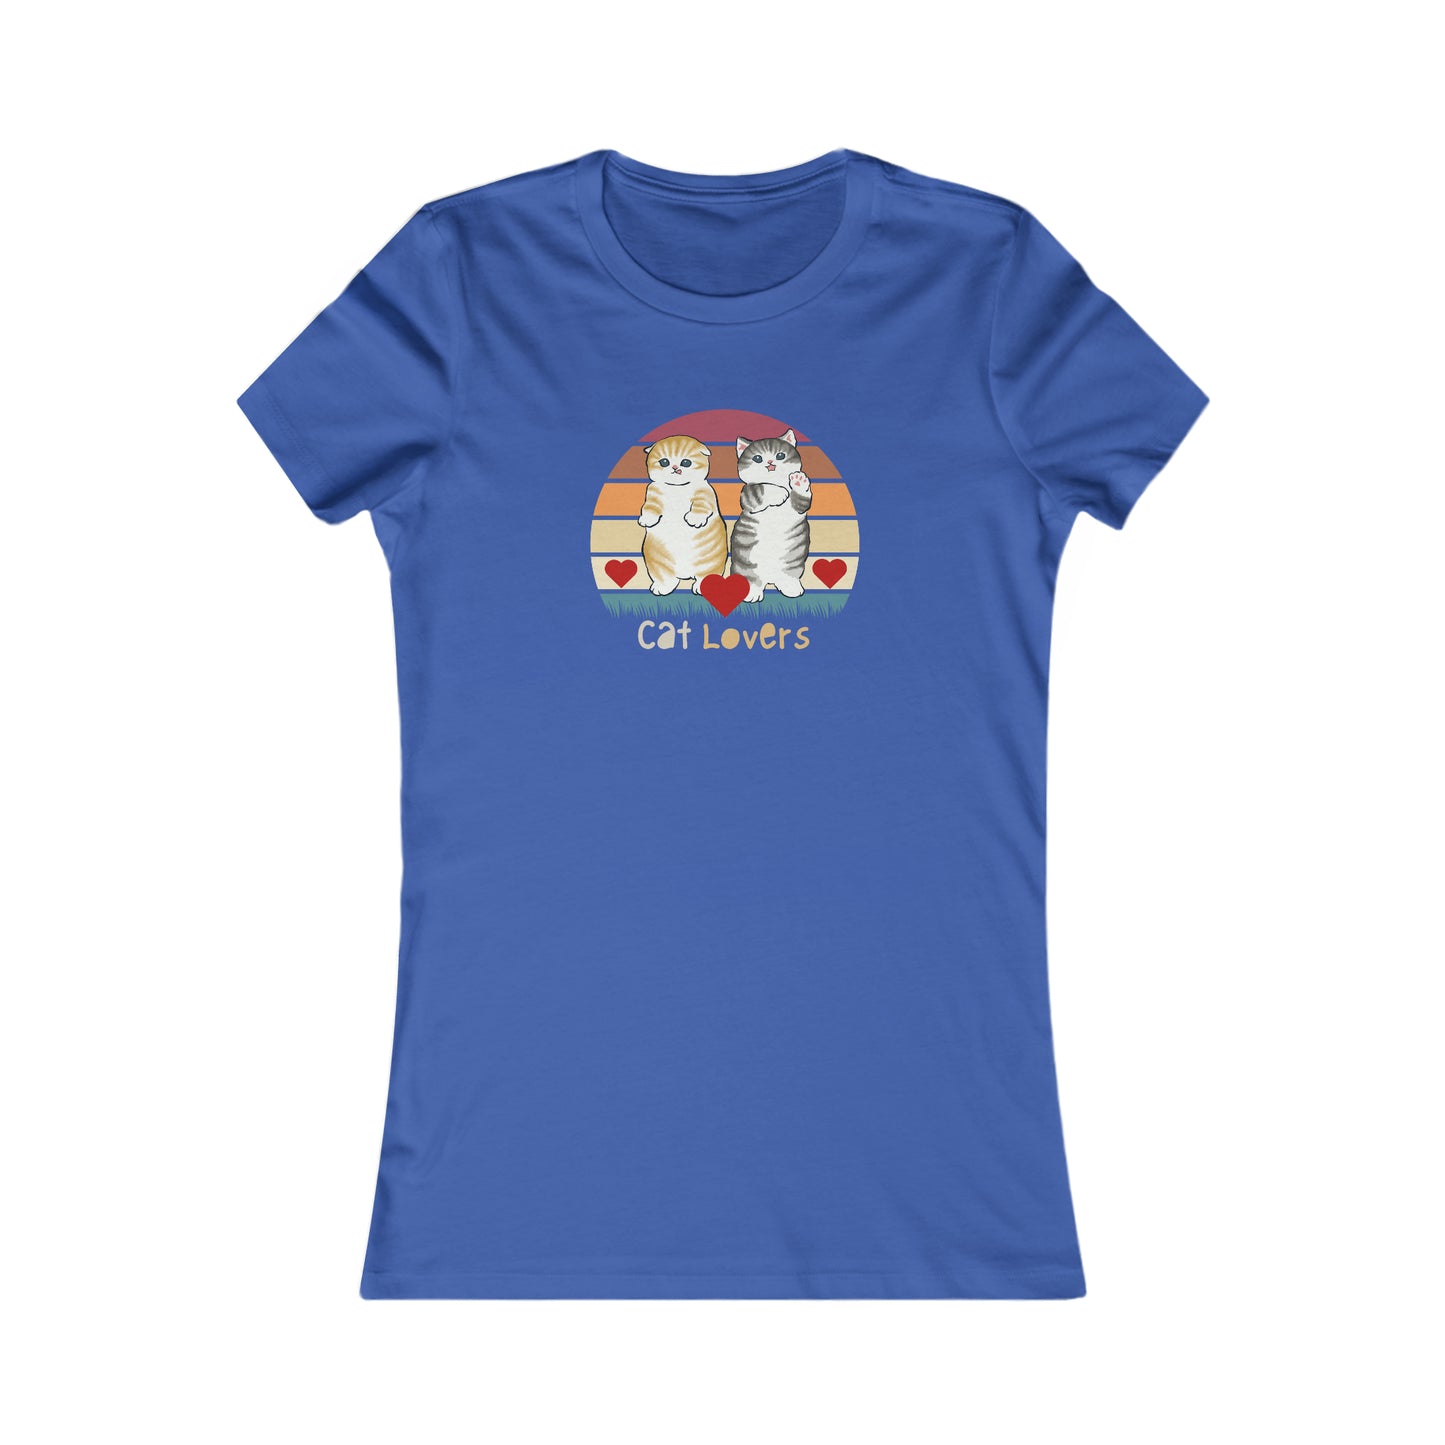 Retro style designed for "cat lovers” at the center of this Women's Favorite Tee design. Slim fit so please check the size table.